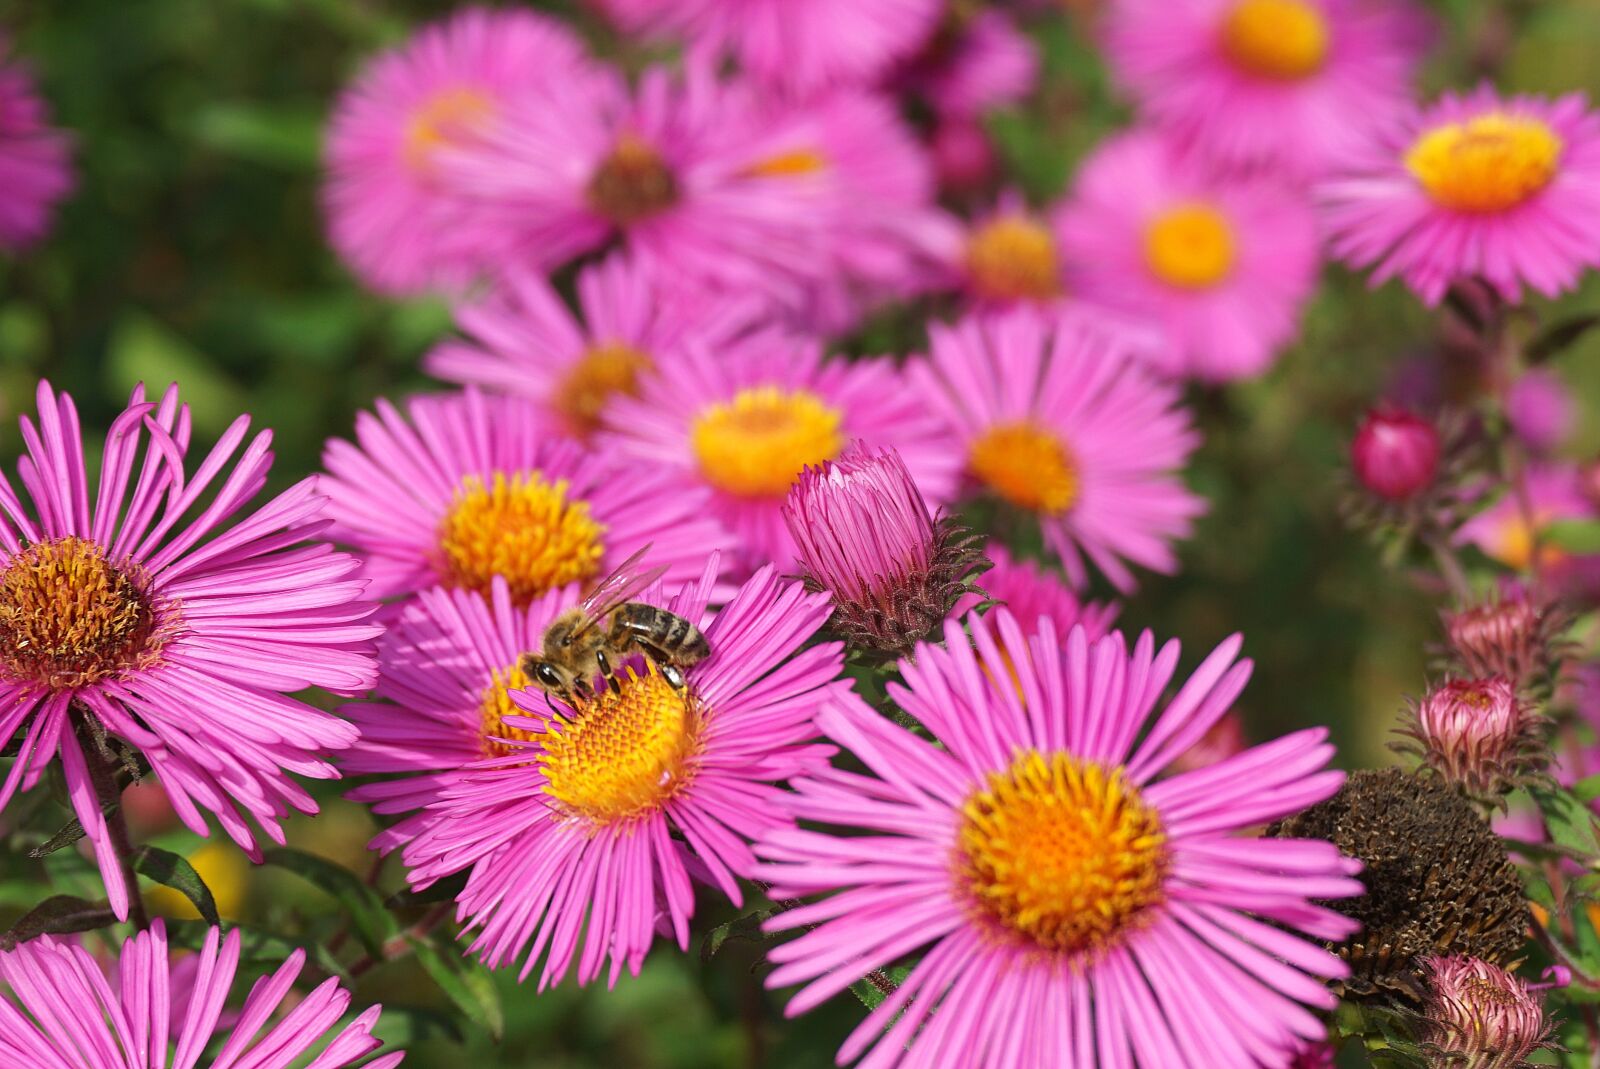 Sony a6000 sample photo. Flowers, bee, insect photography